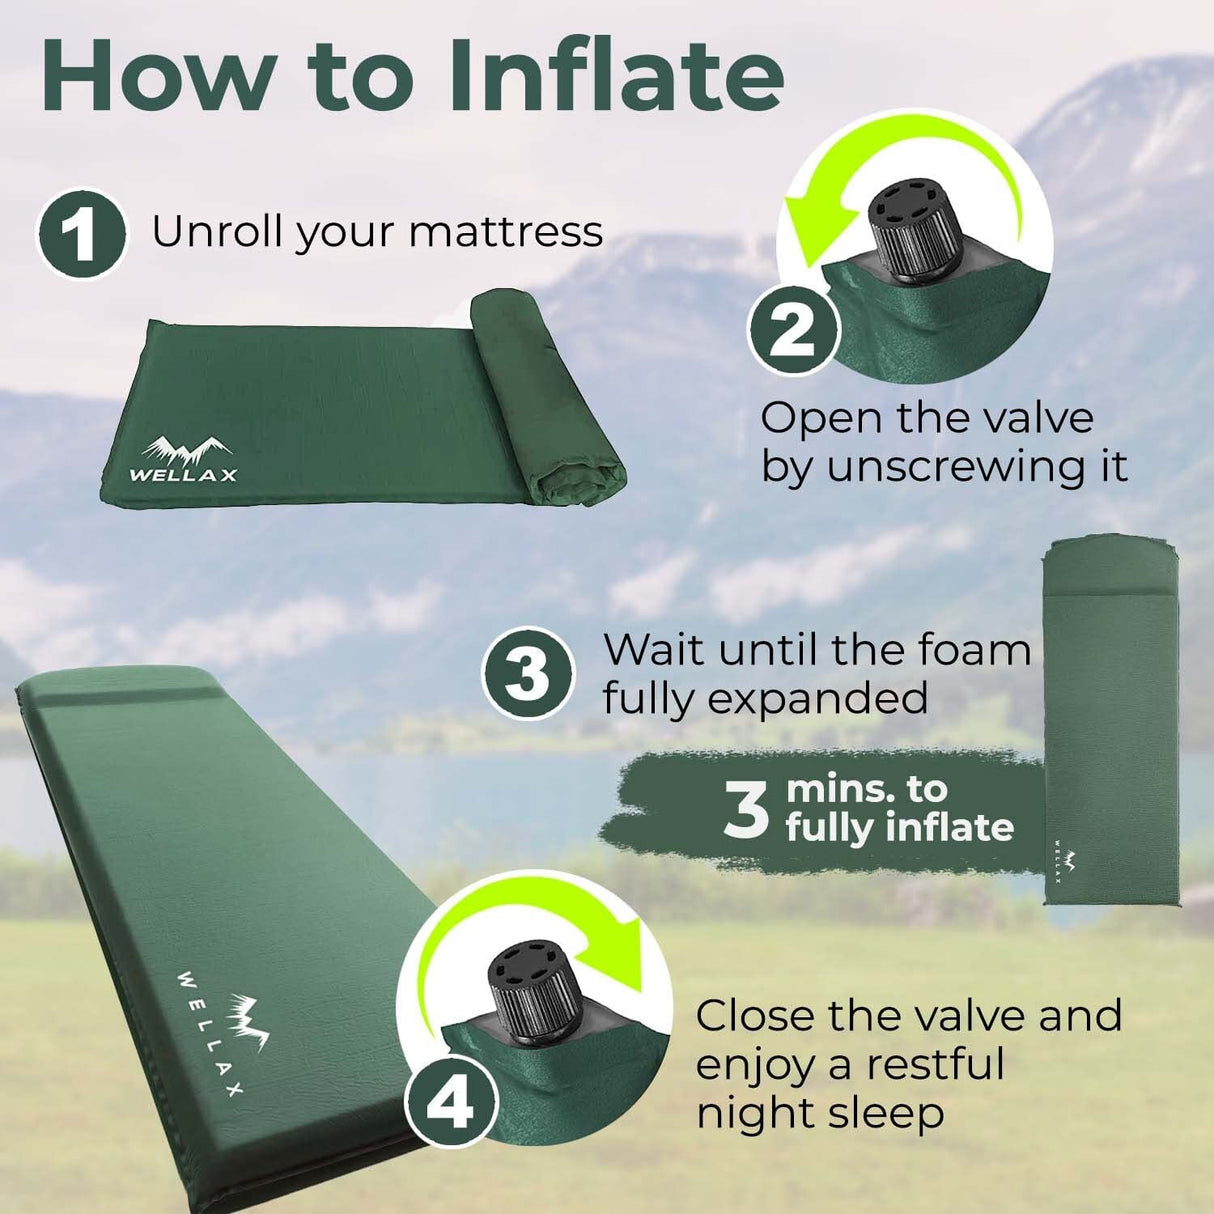 WELLAX Sleeping Pad - Foam Camping Mats, Fast Air Self-Inflating Insulated Durable Mattress for Backpacking, Traveling and Hiking - Ultrathick All-Weather Foam Pad with Build in Pillow (Green-3")